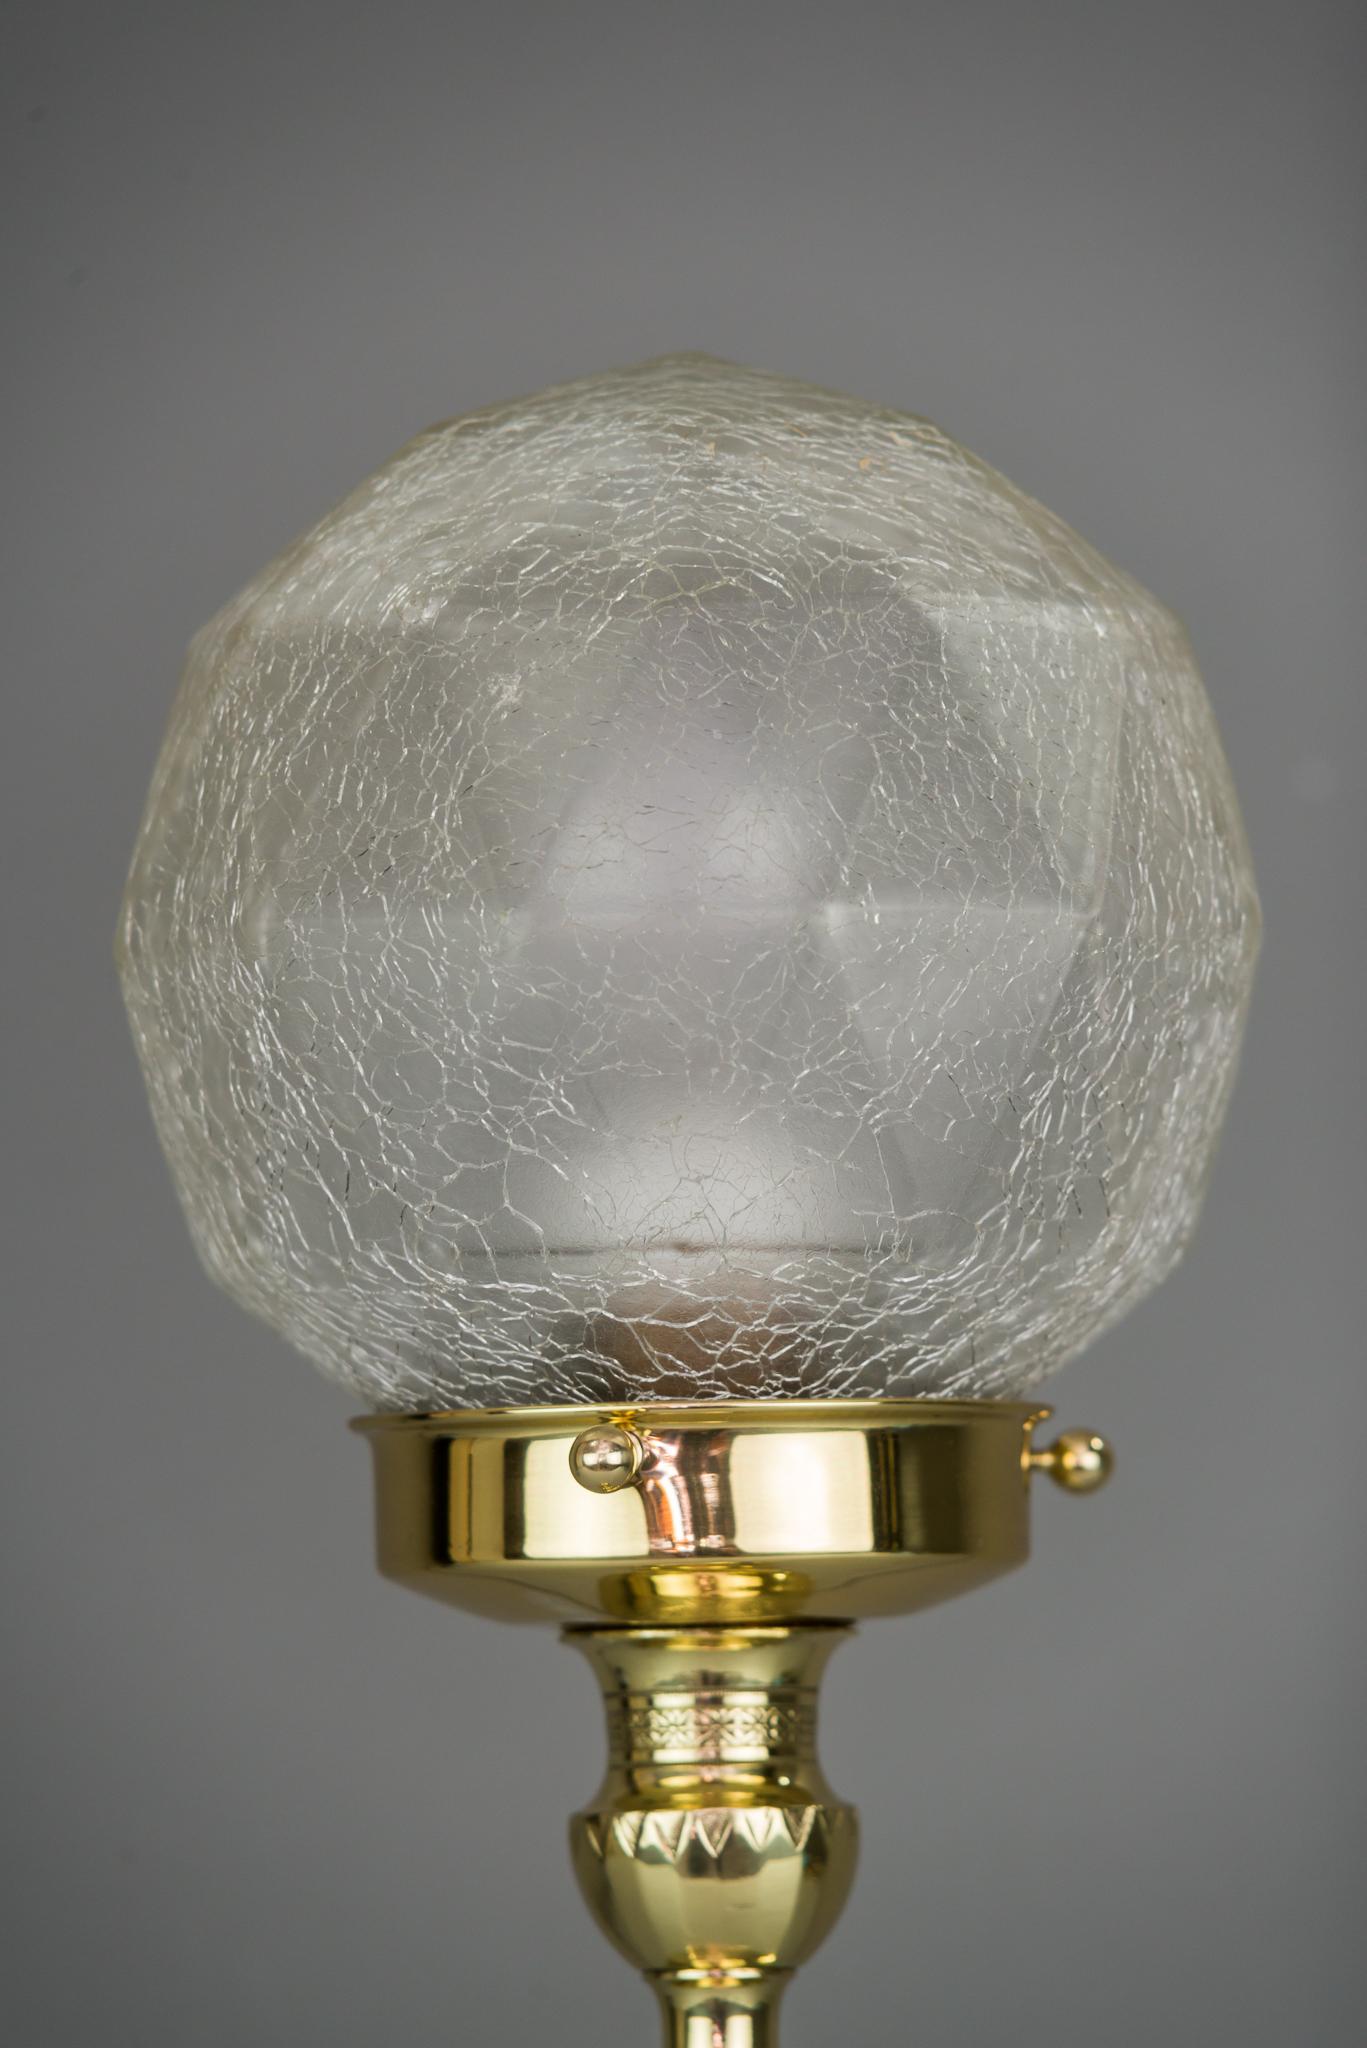 Art Deco table lamp with original glass shade, circa 1920s
Polished and stove enameled.